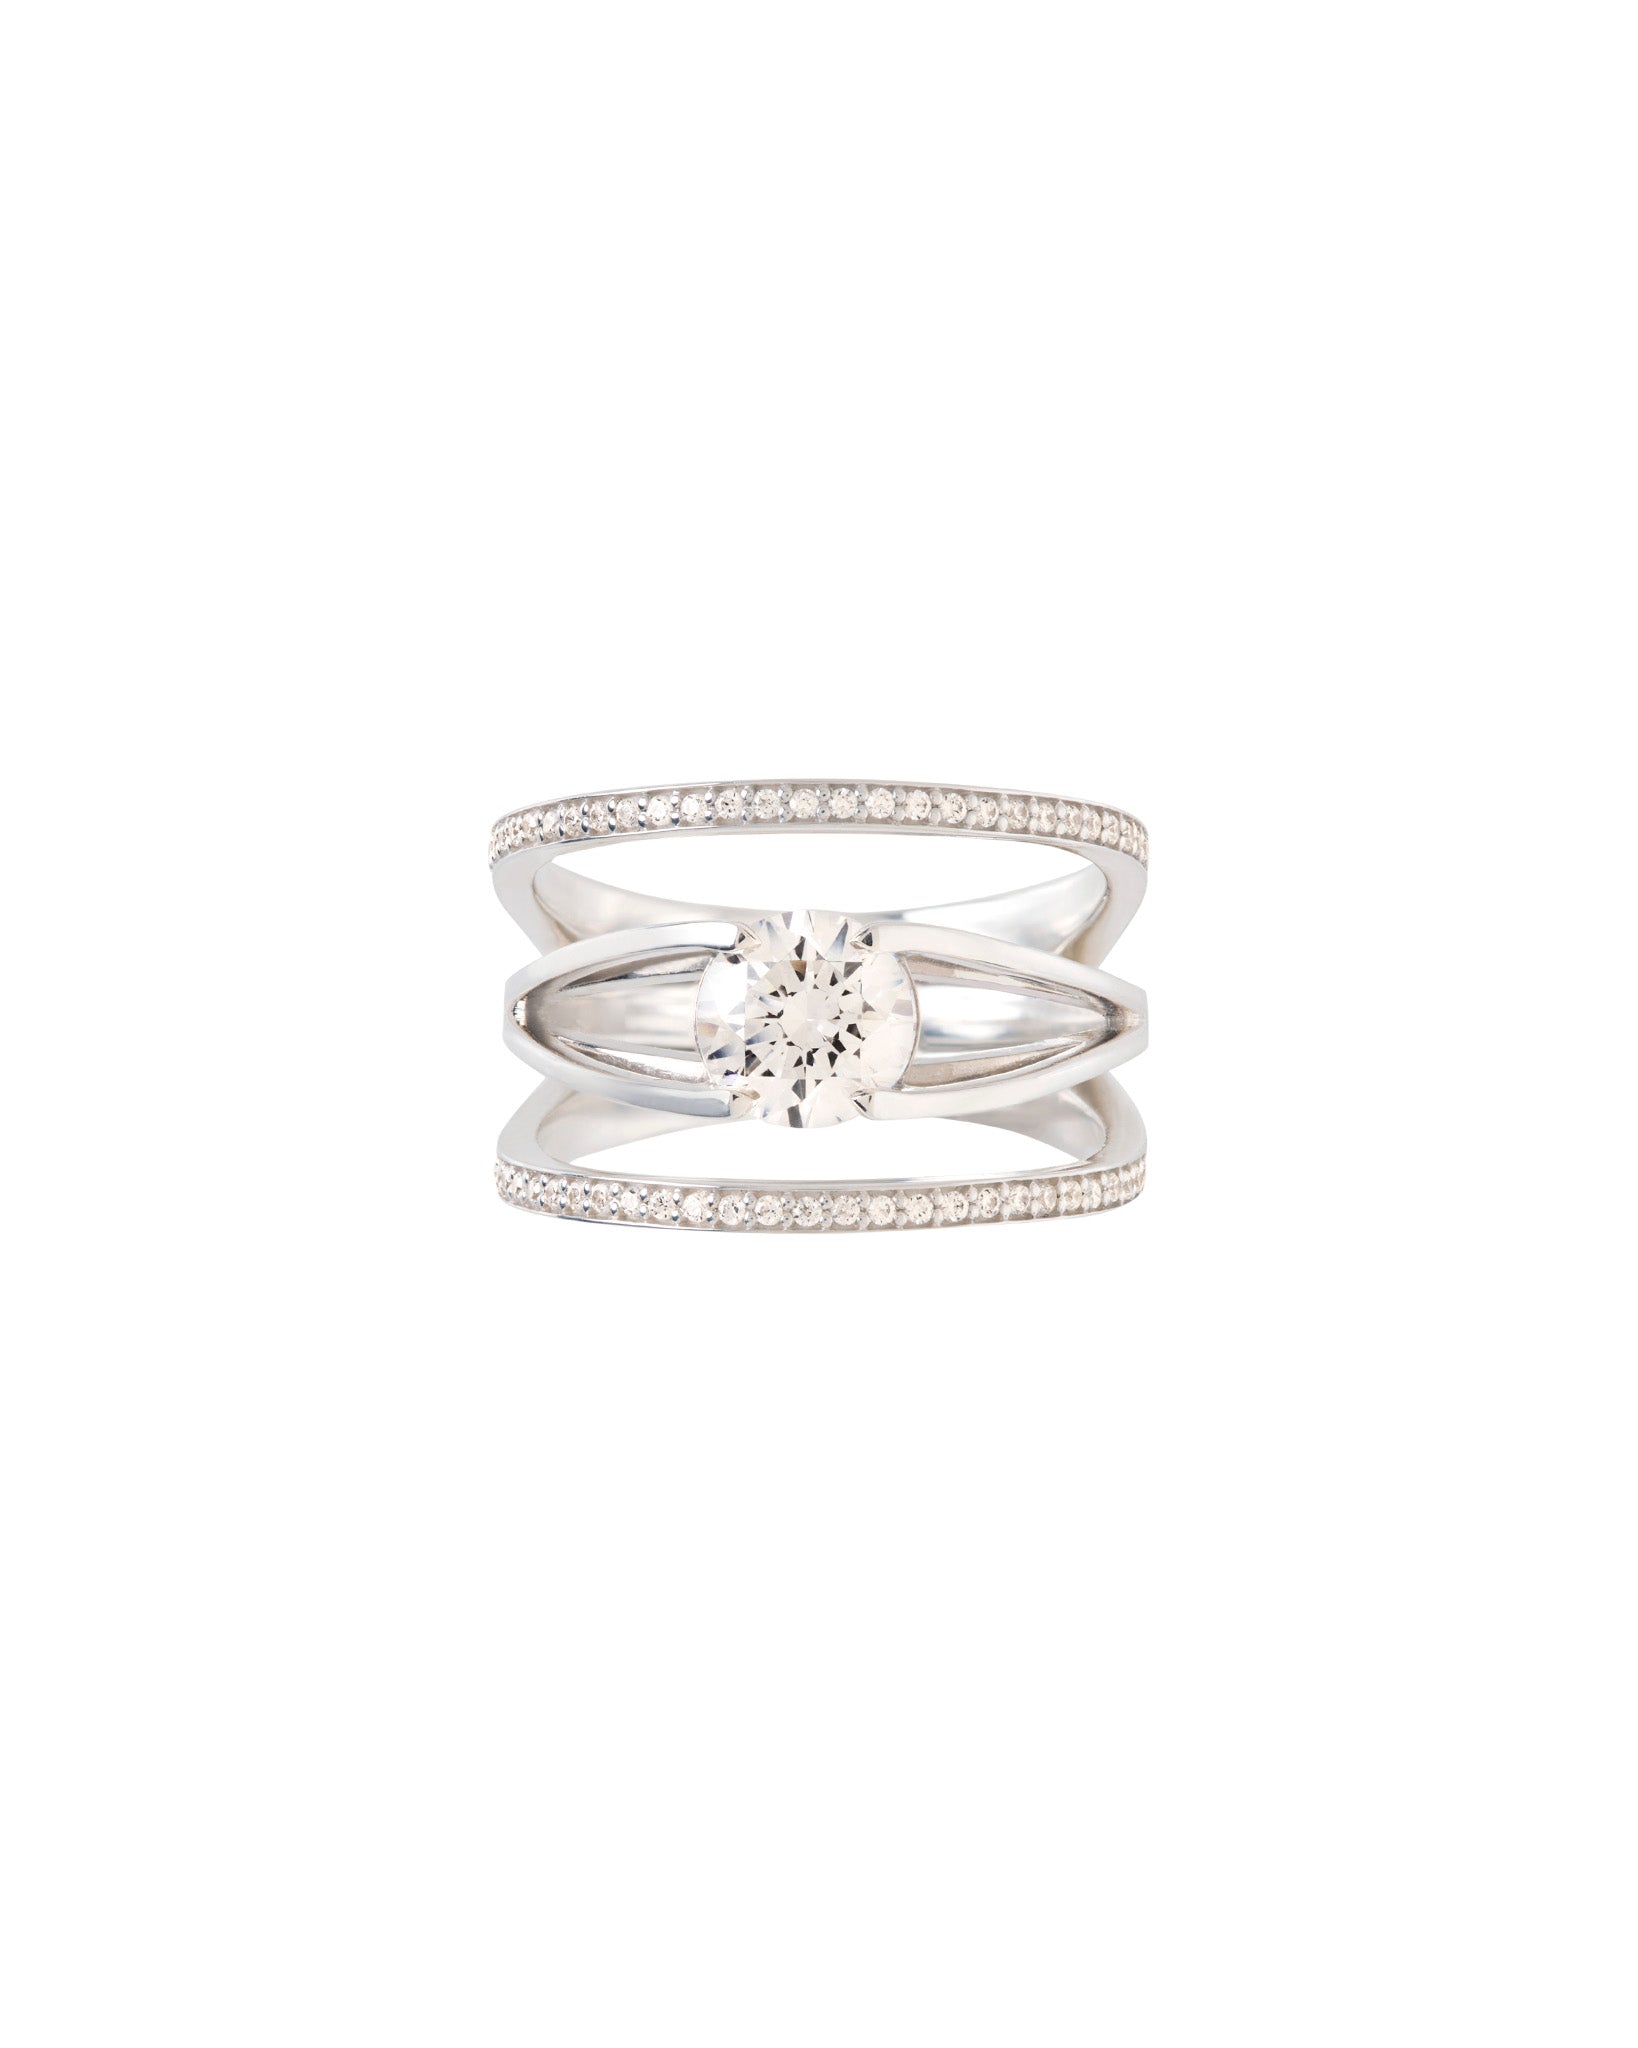 Acute 13mm Enclose + Centered Ring Set White Gold